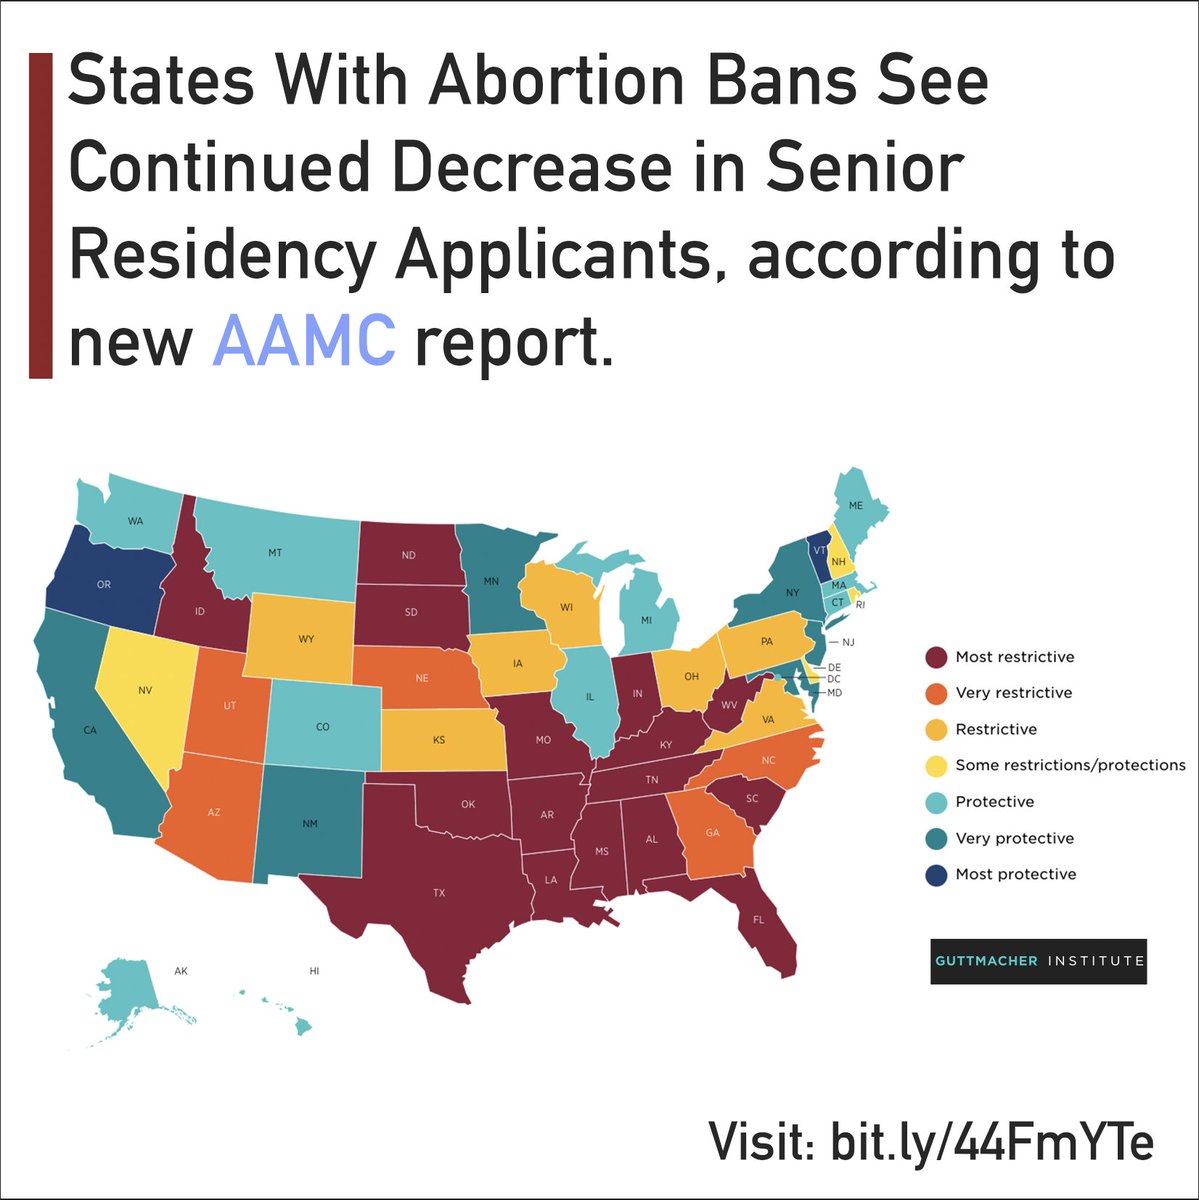 States With #Abortion Bans See Continued Decrease in Senior Residency Applicants, according to new @AAMCtoday report. This forebodes a growing threat to patient care and an worsening rate of maternal mortality in these states. #maternalmortality bit.ly/44FmYTe